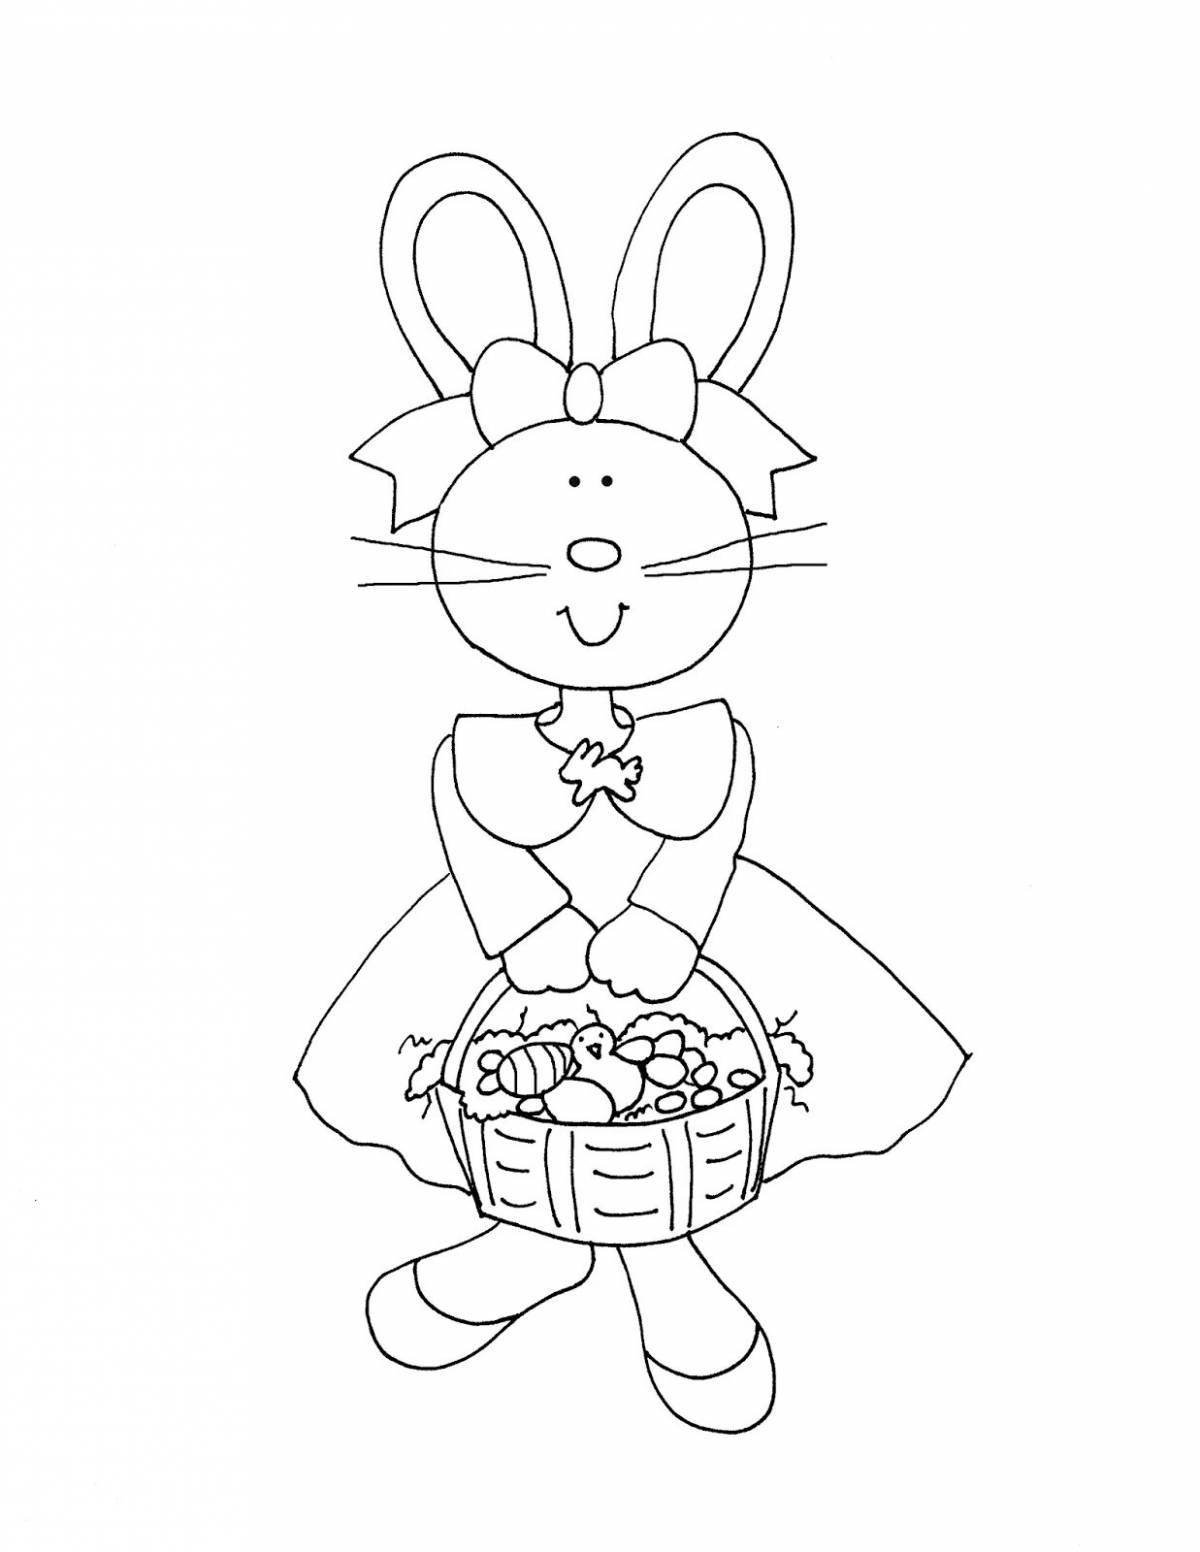 Witty rabbit man coloring book